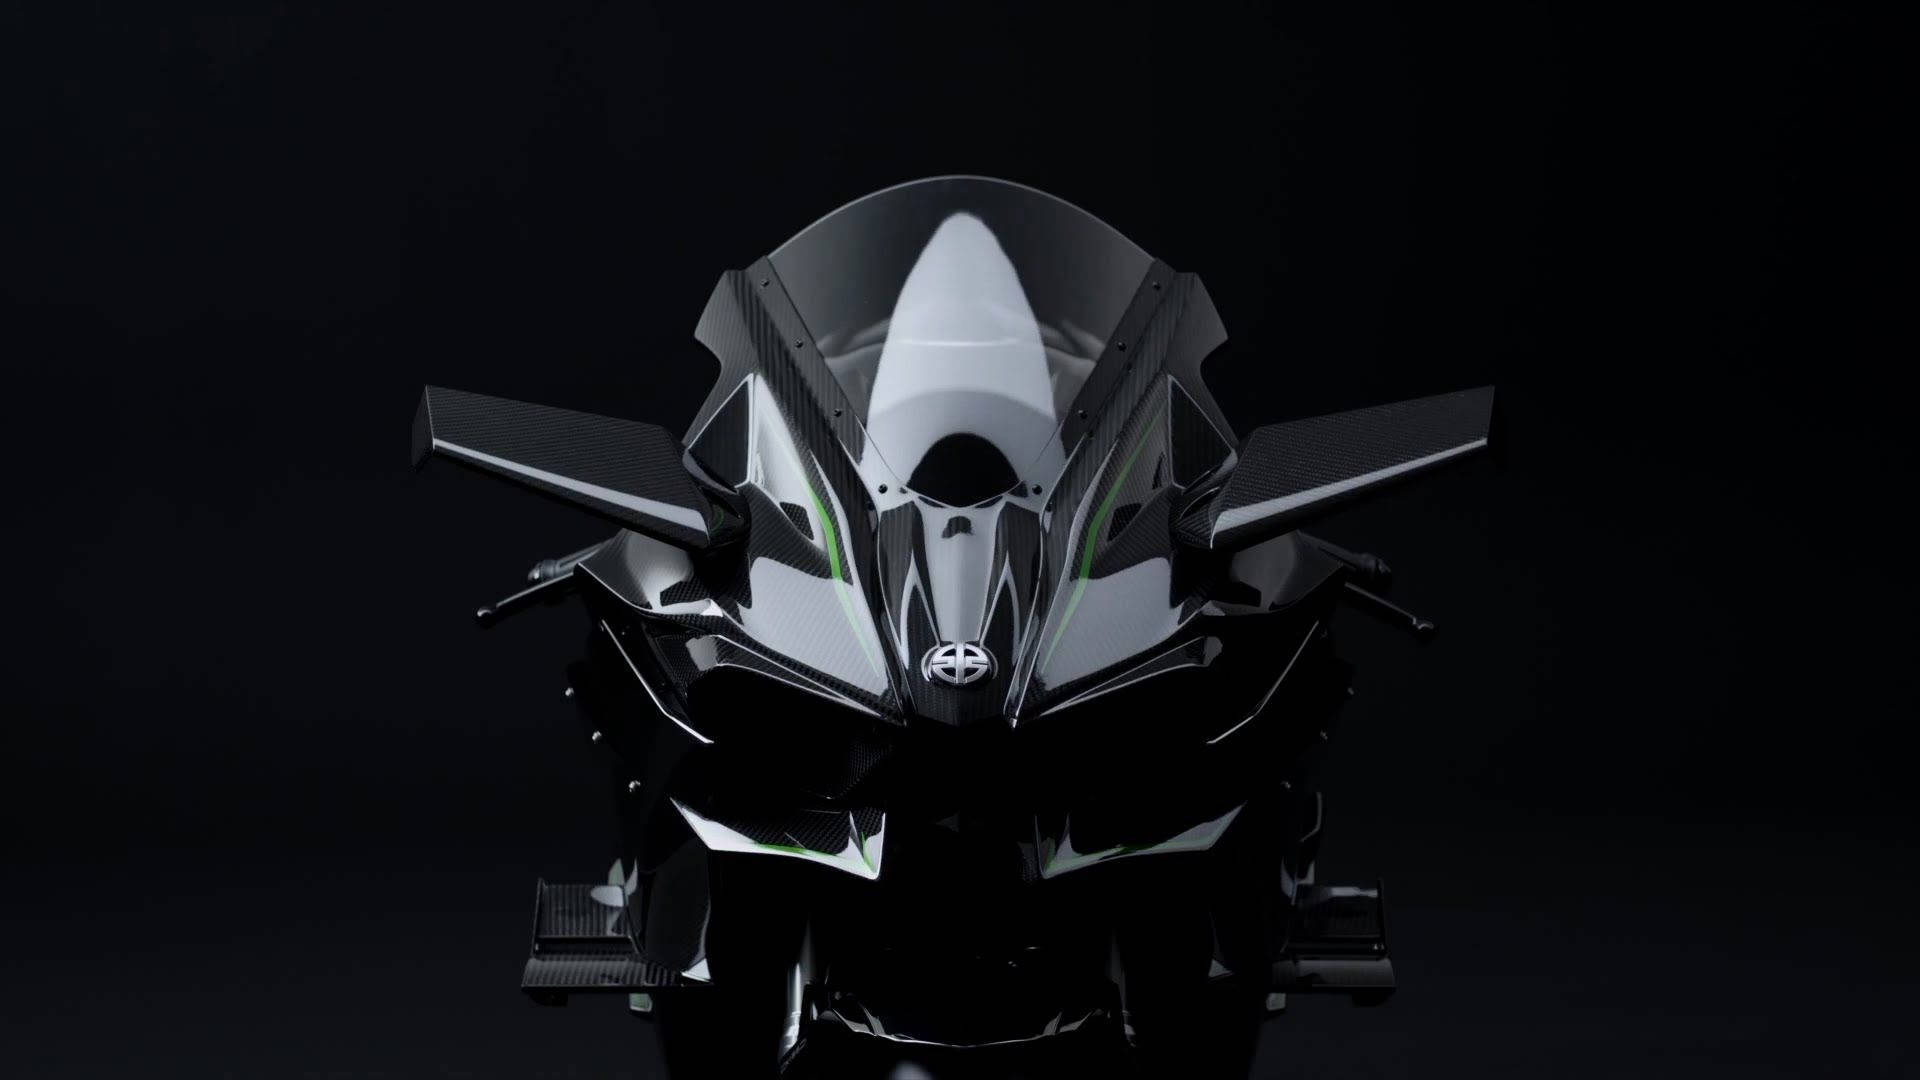 Impressive Front Features Of The Black Kawasaki H2r Motorcycle